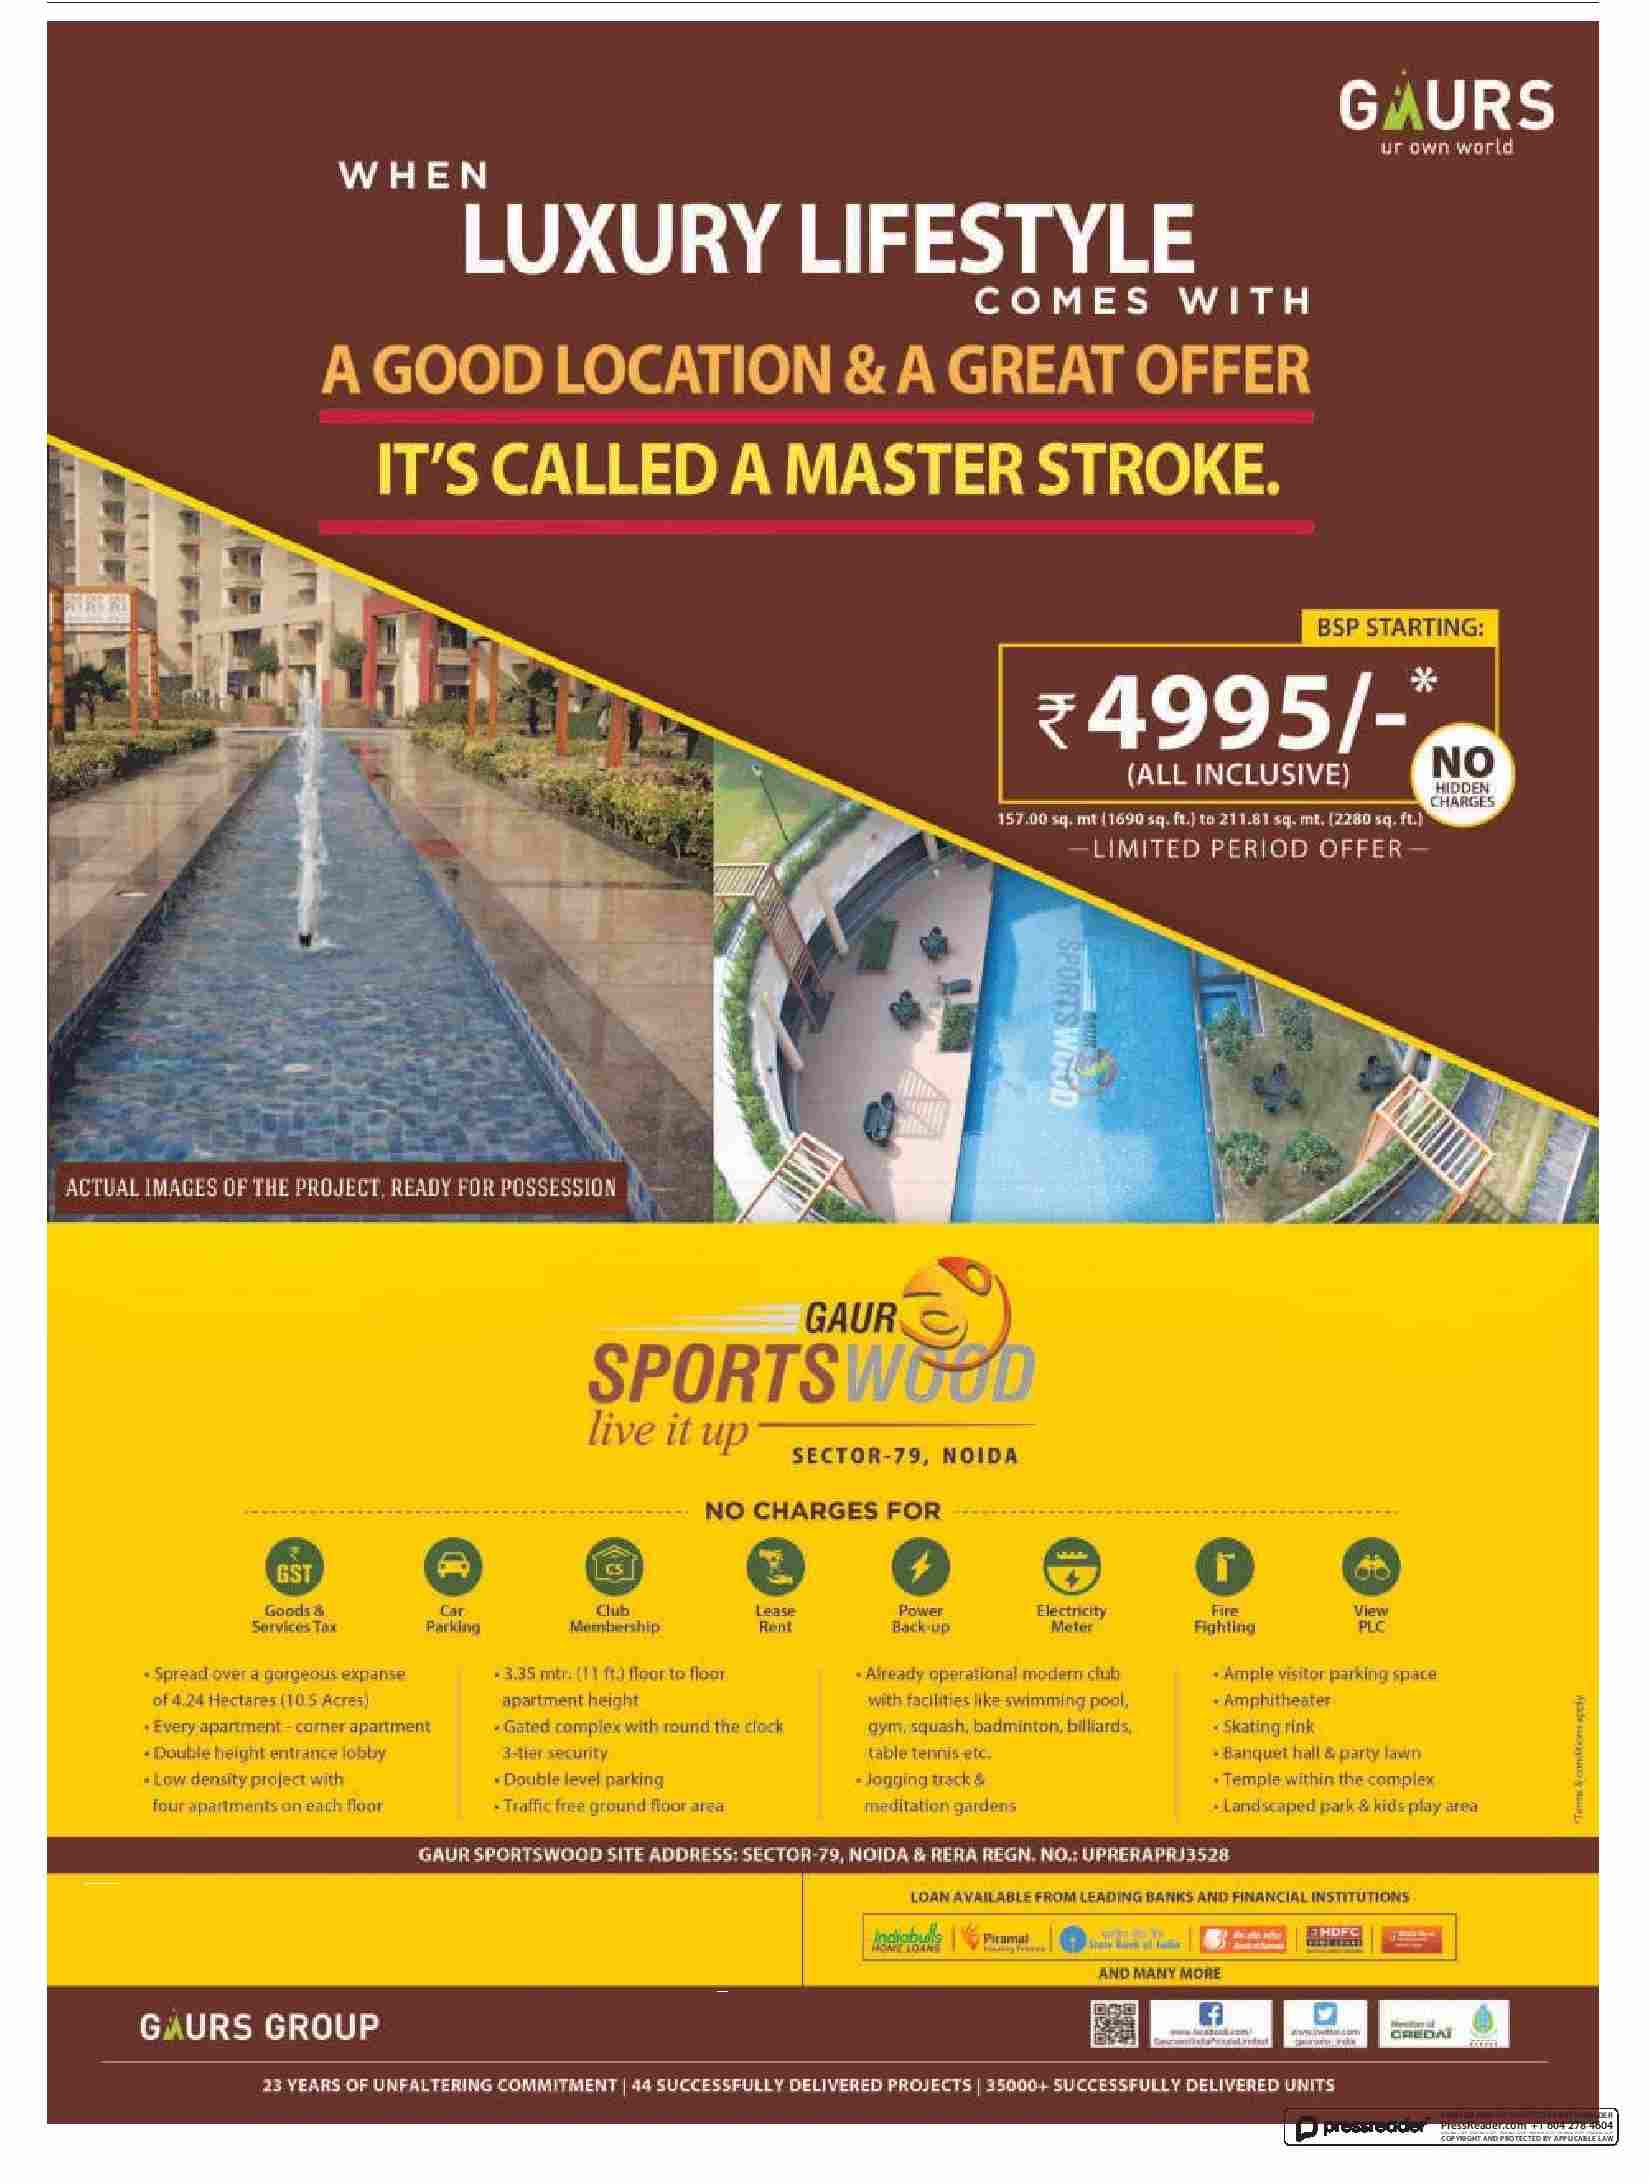 Book home with BSP starting at Rs. 4995 at Gaur Sportswood in Noida